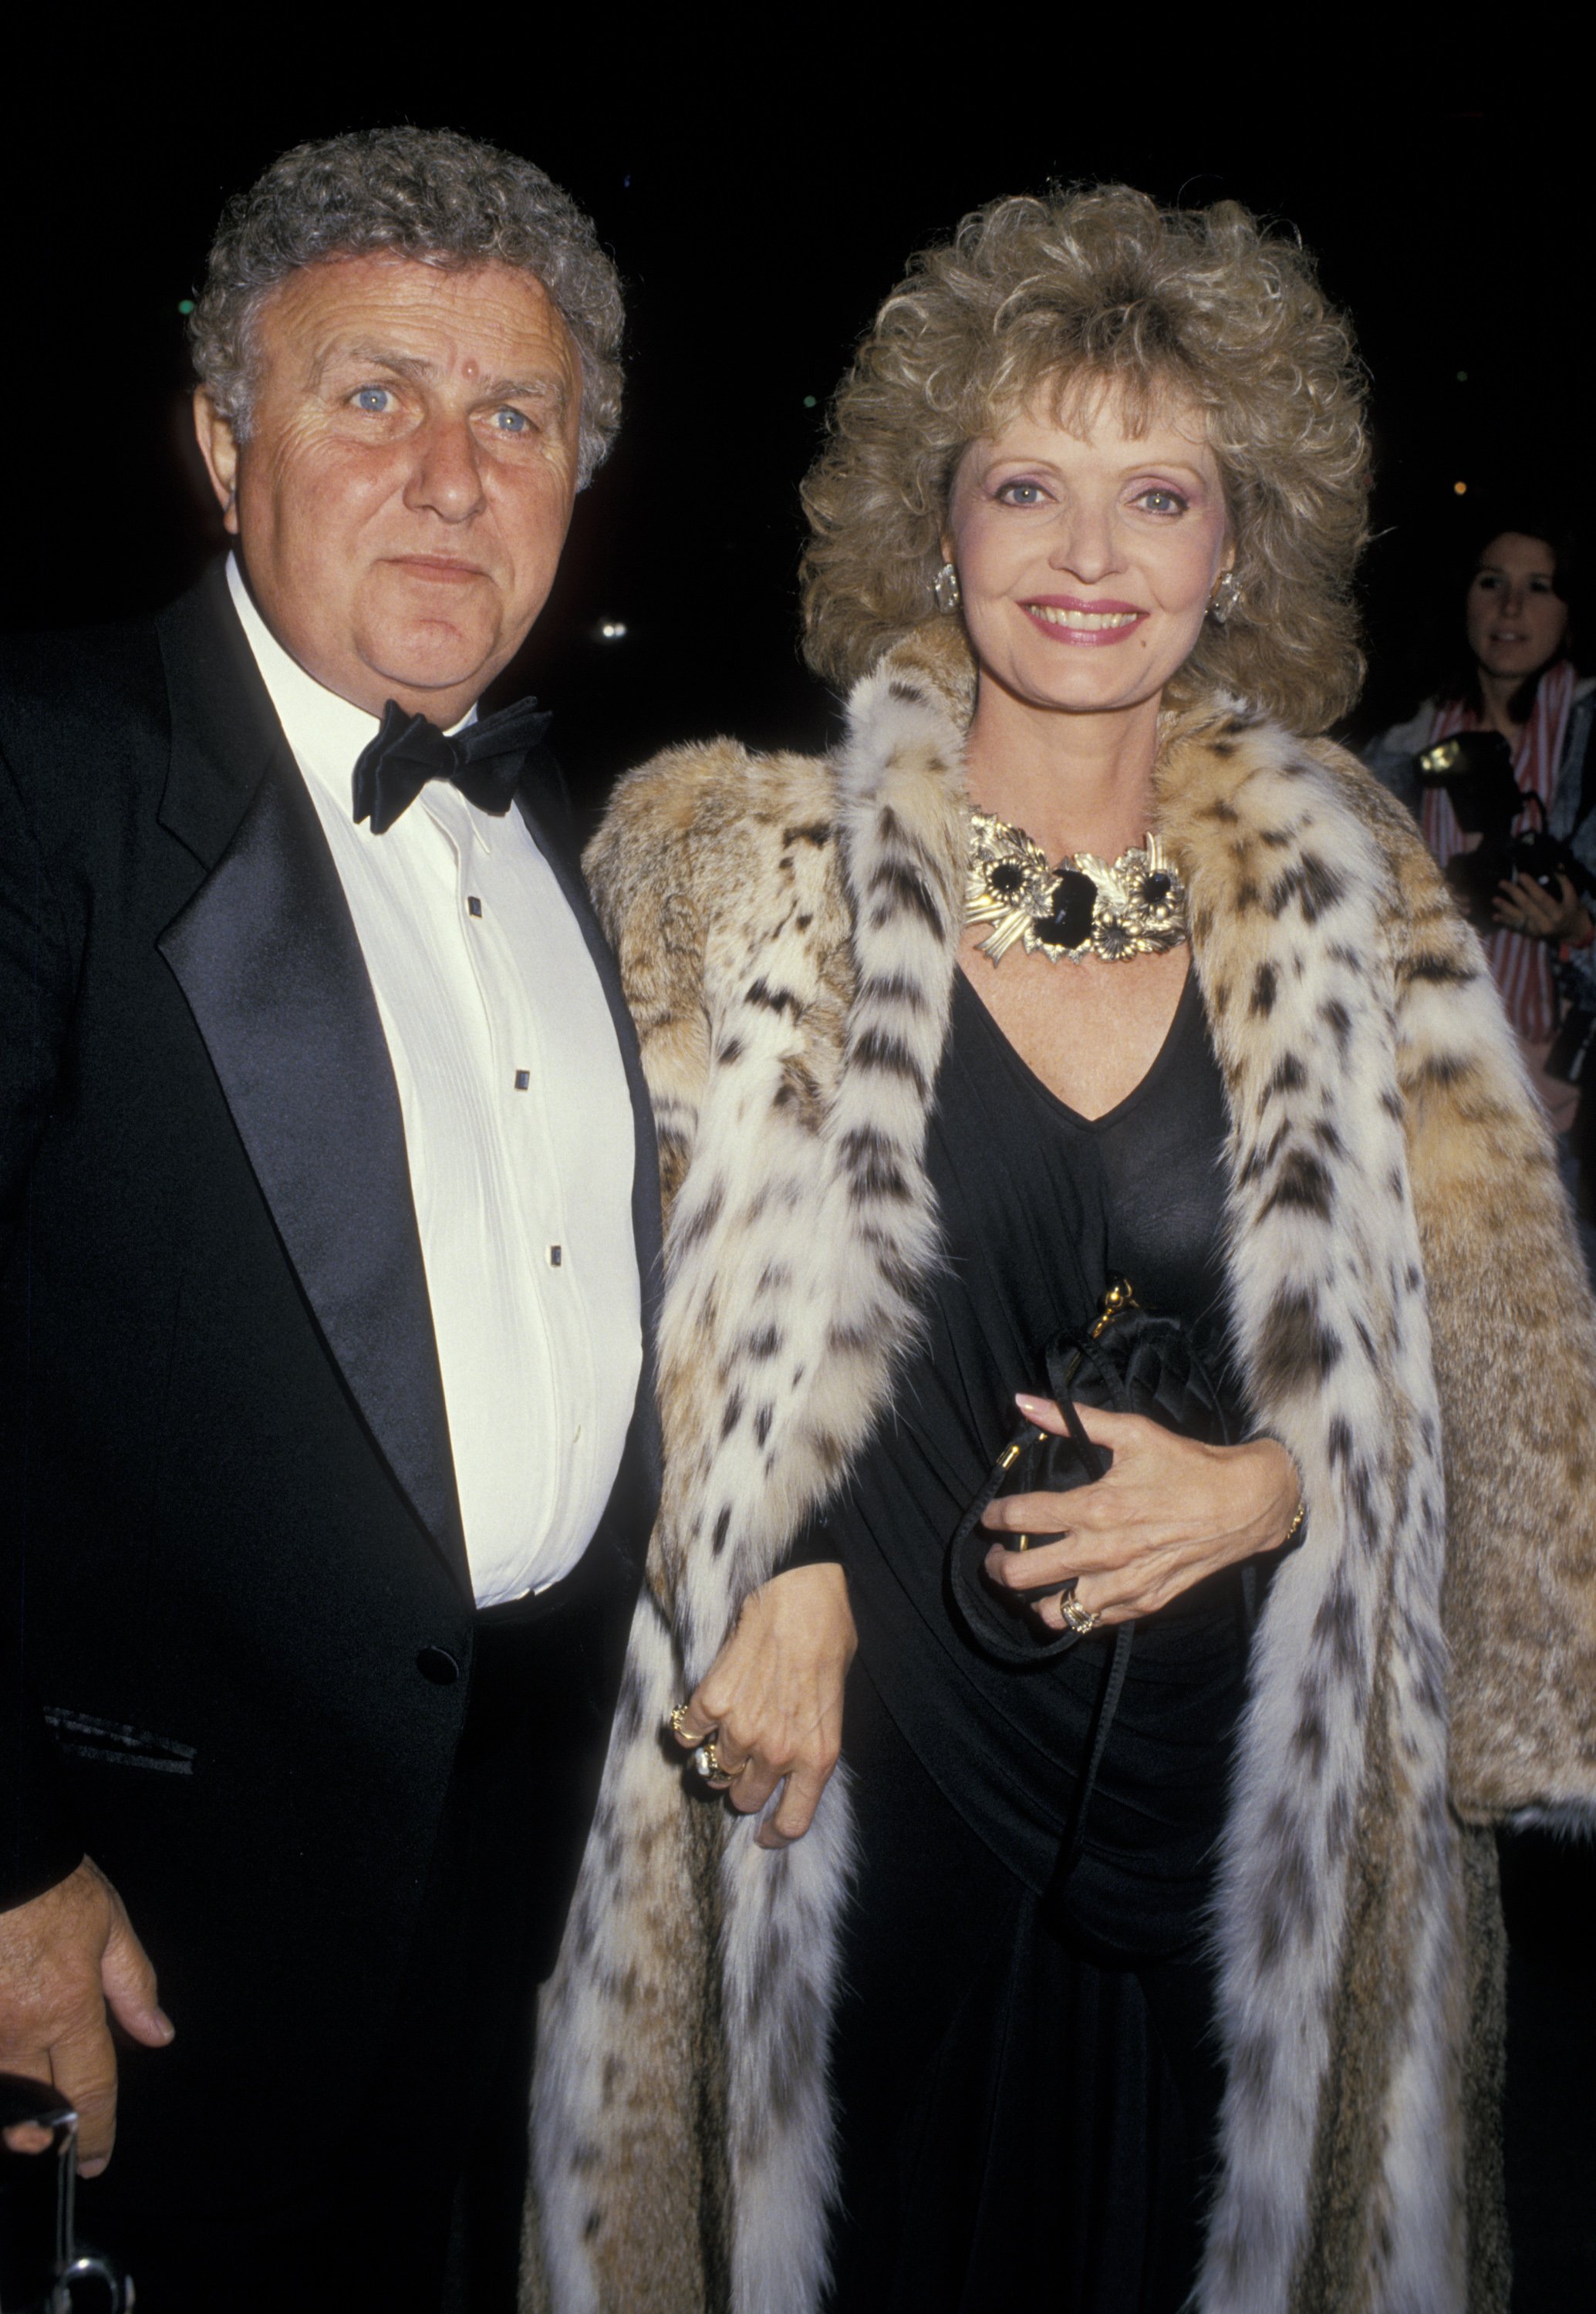 John Kappas and Florence Henderson at the “Variety Club International All-Star Party” on November 22, 1987, in Burbank, California | Photo: Ron Galella, Ltd./Ron Galella Collection/Getty Images